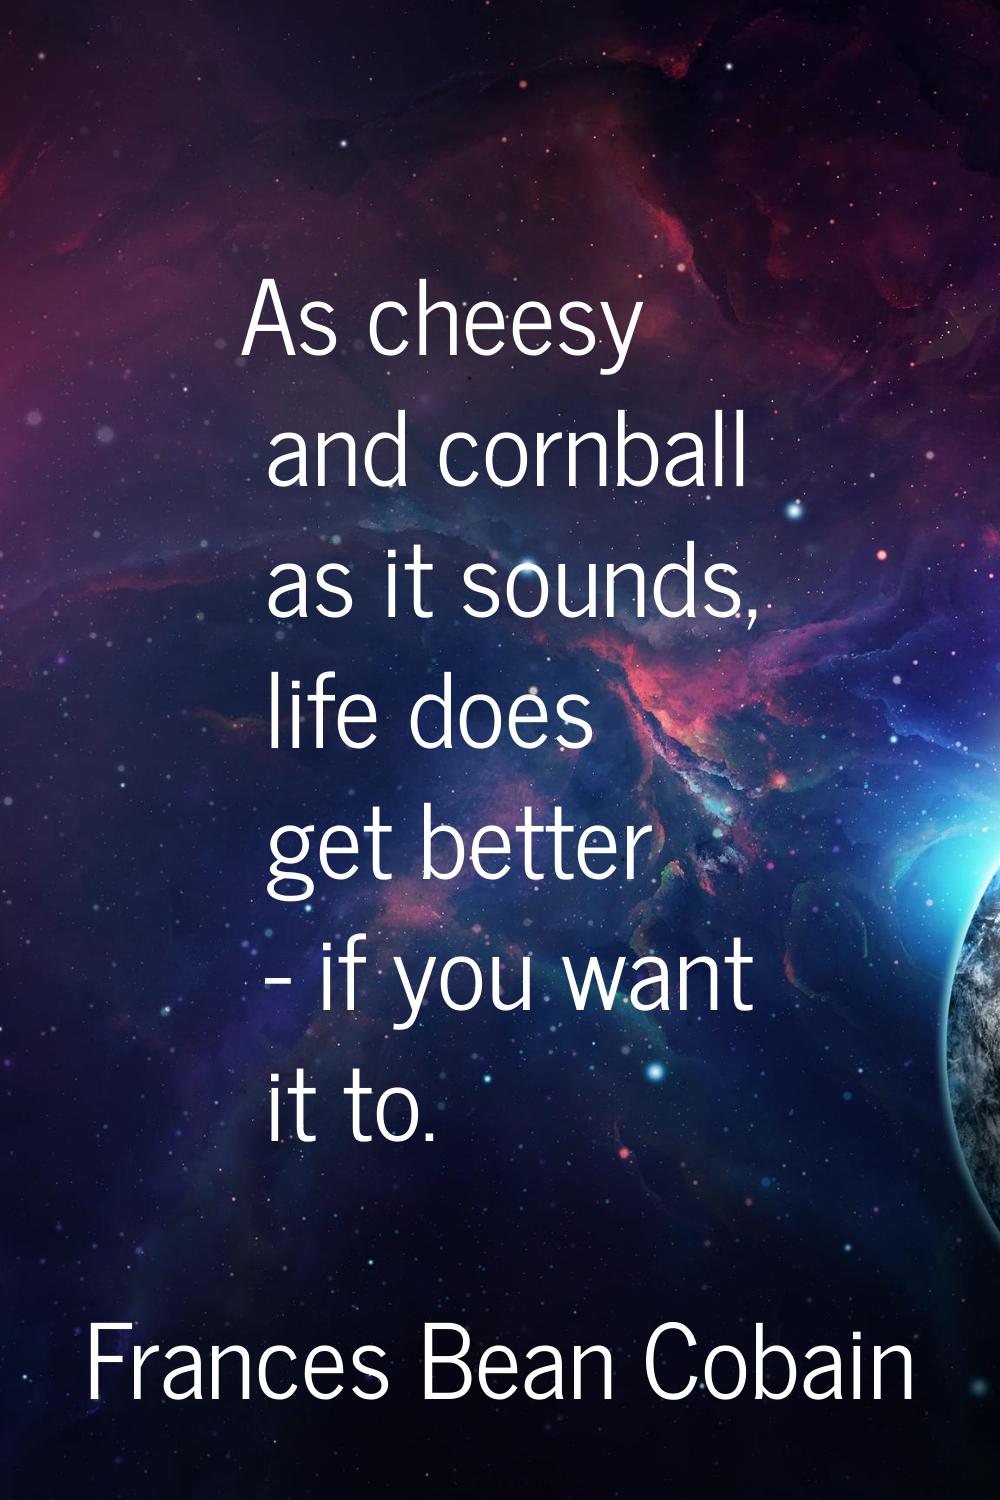 As cheesy and cornball as it sounds, life does get better - if you want it to.